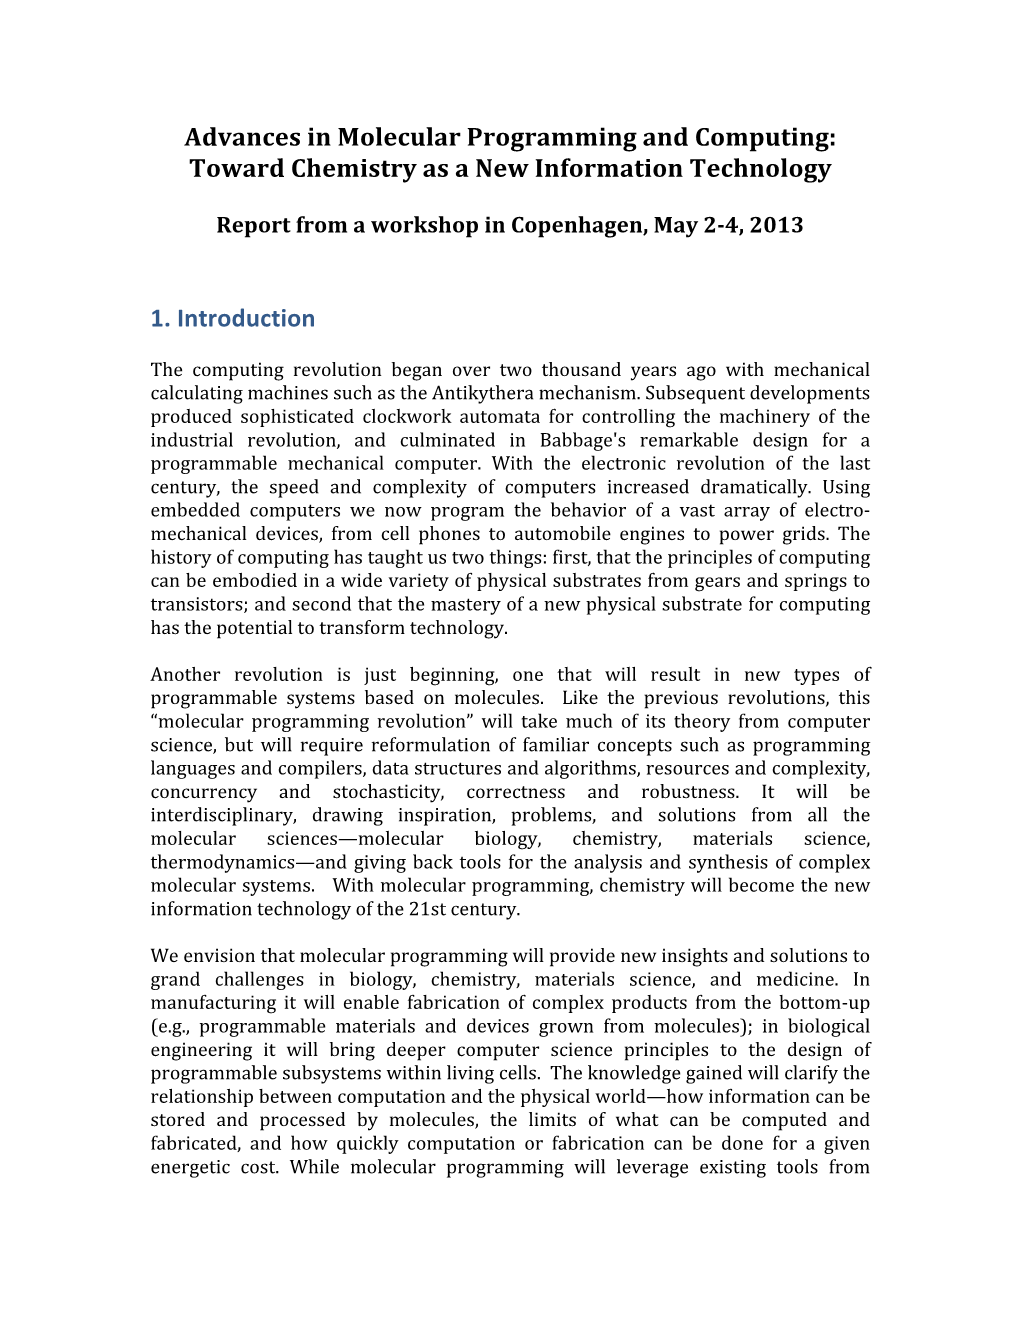 Advances in Molecular Programming and Computing: Toward Chemistry As a New Information Technology